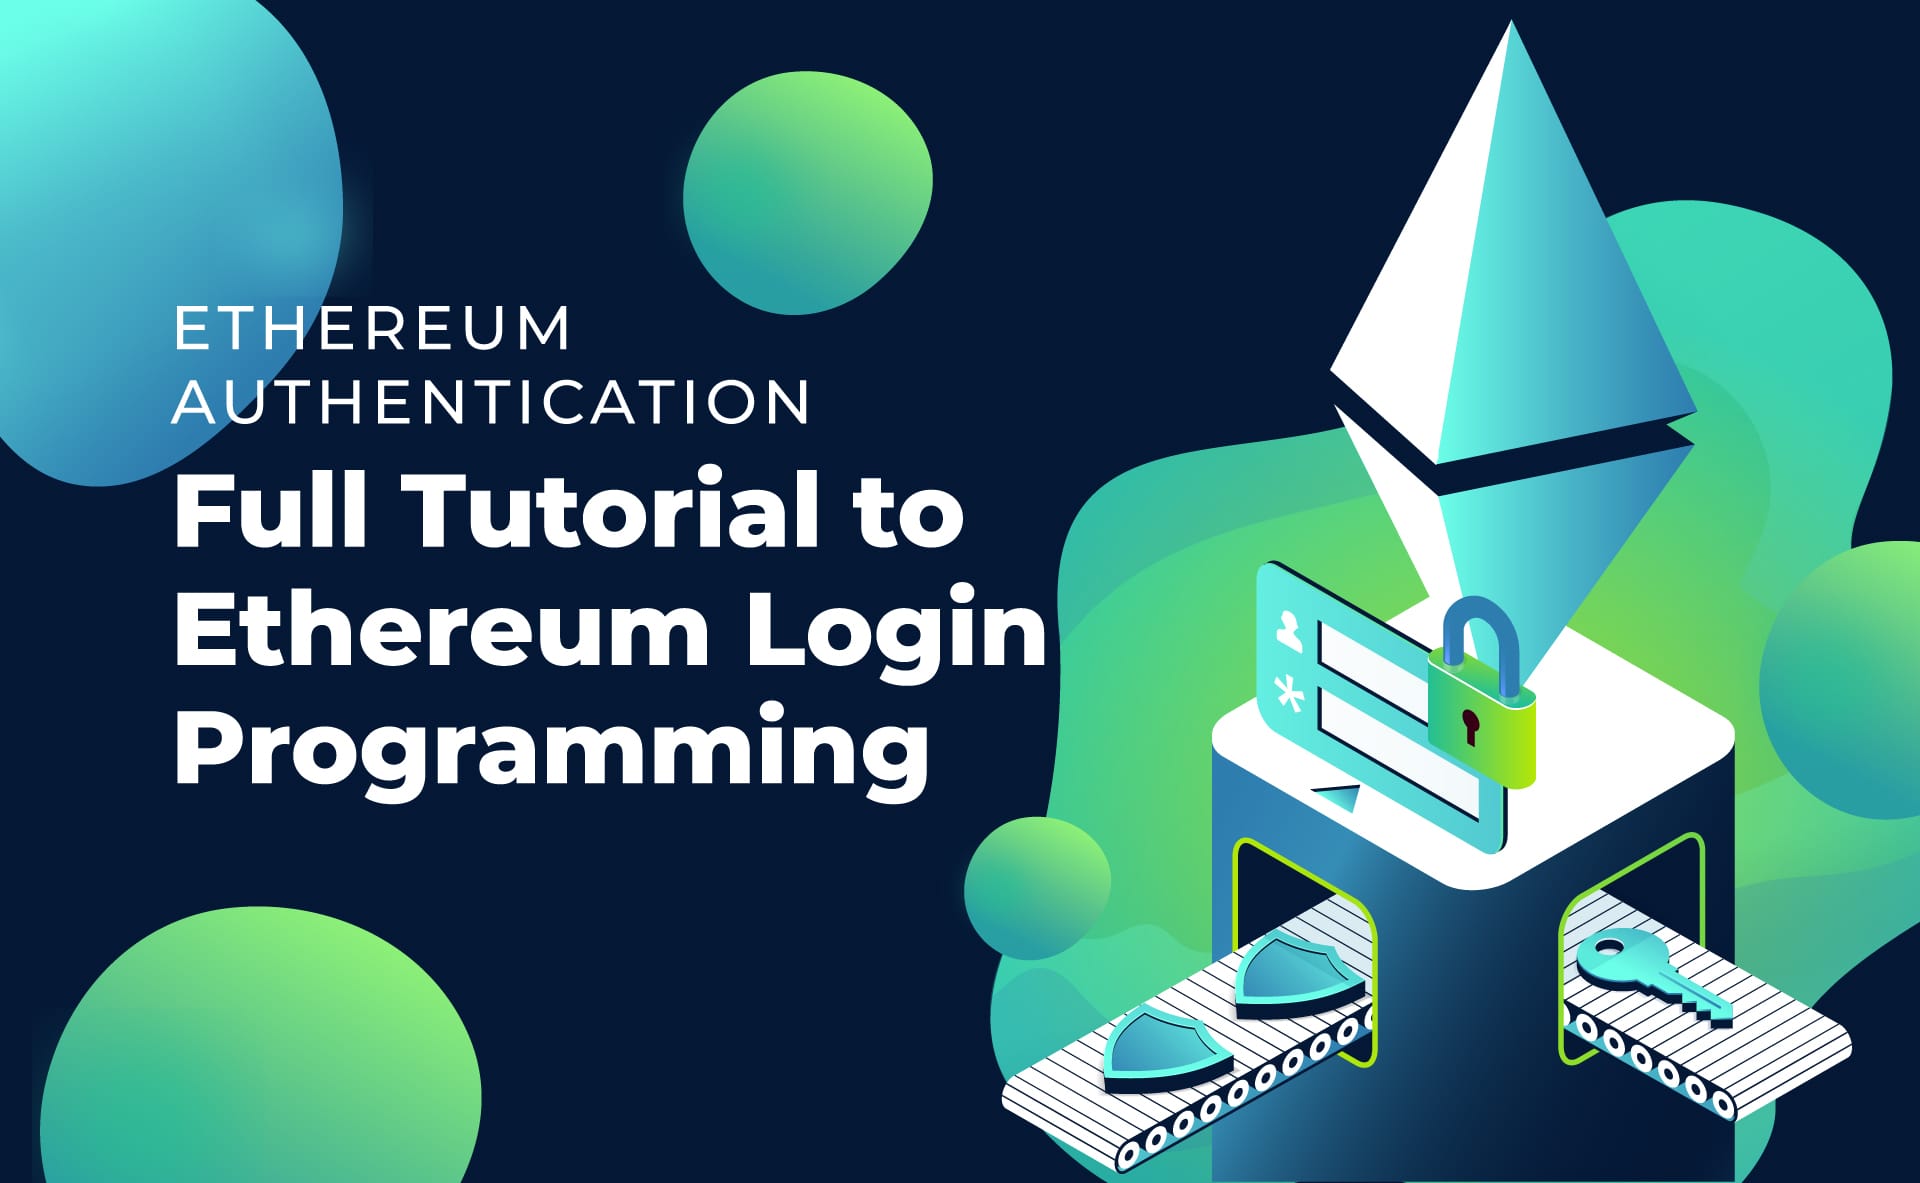 this pool does not support ethereum addresses as login